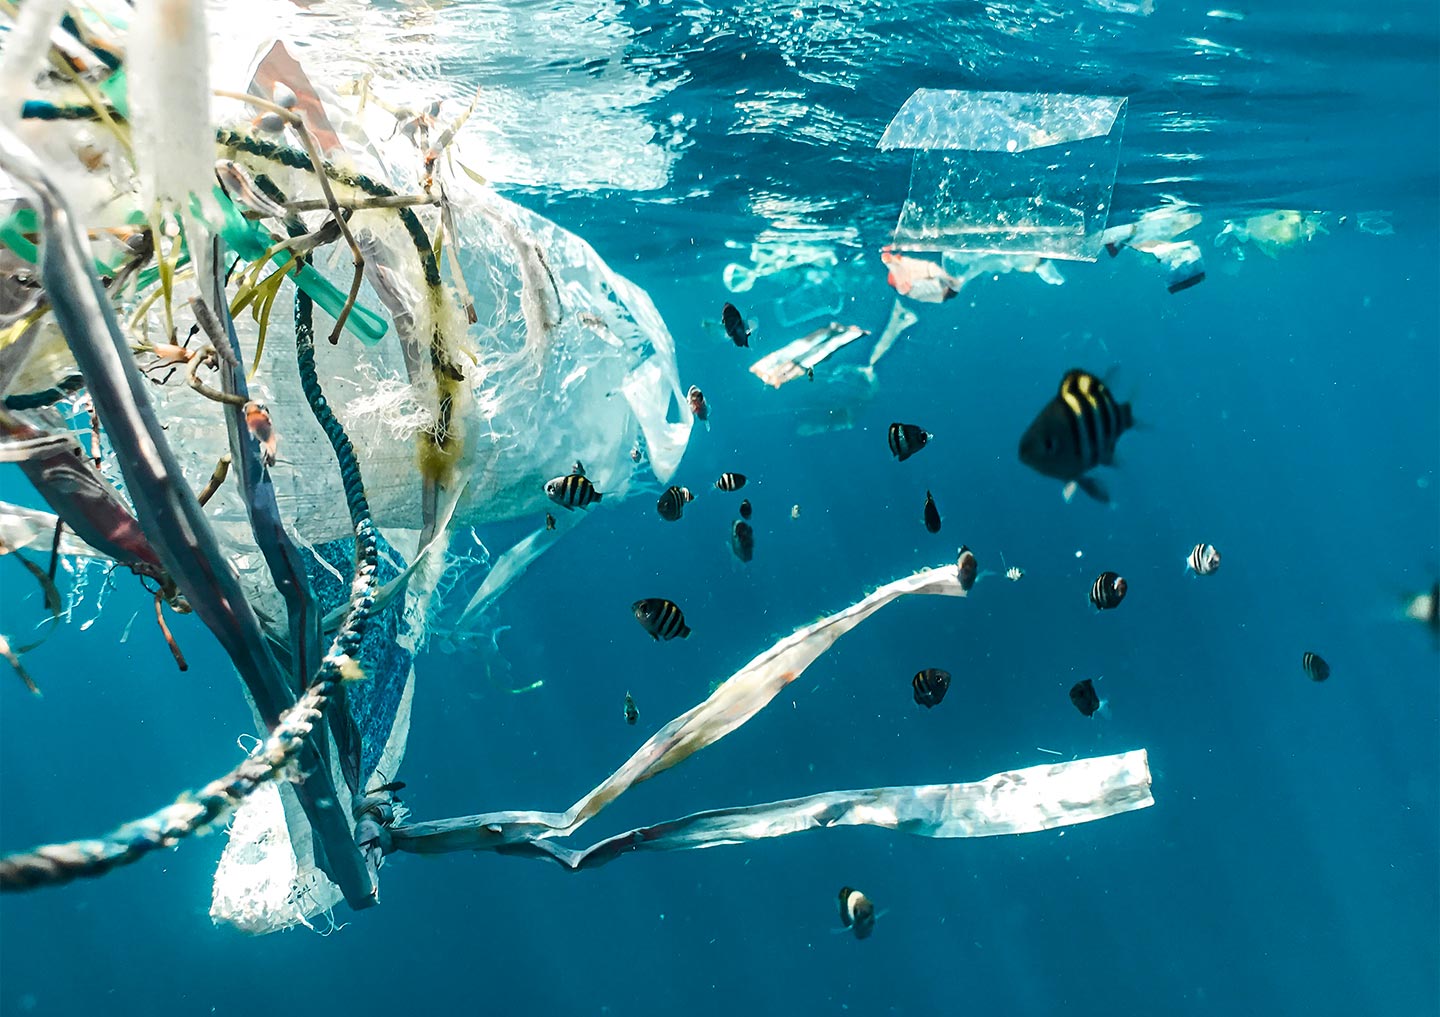 Plastic pollution has become one of the most pressing environmental issues